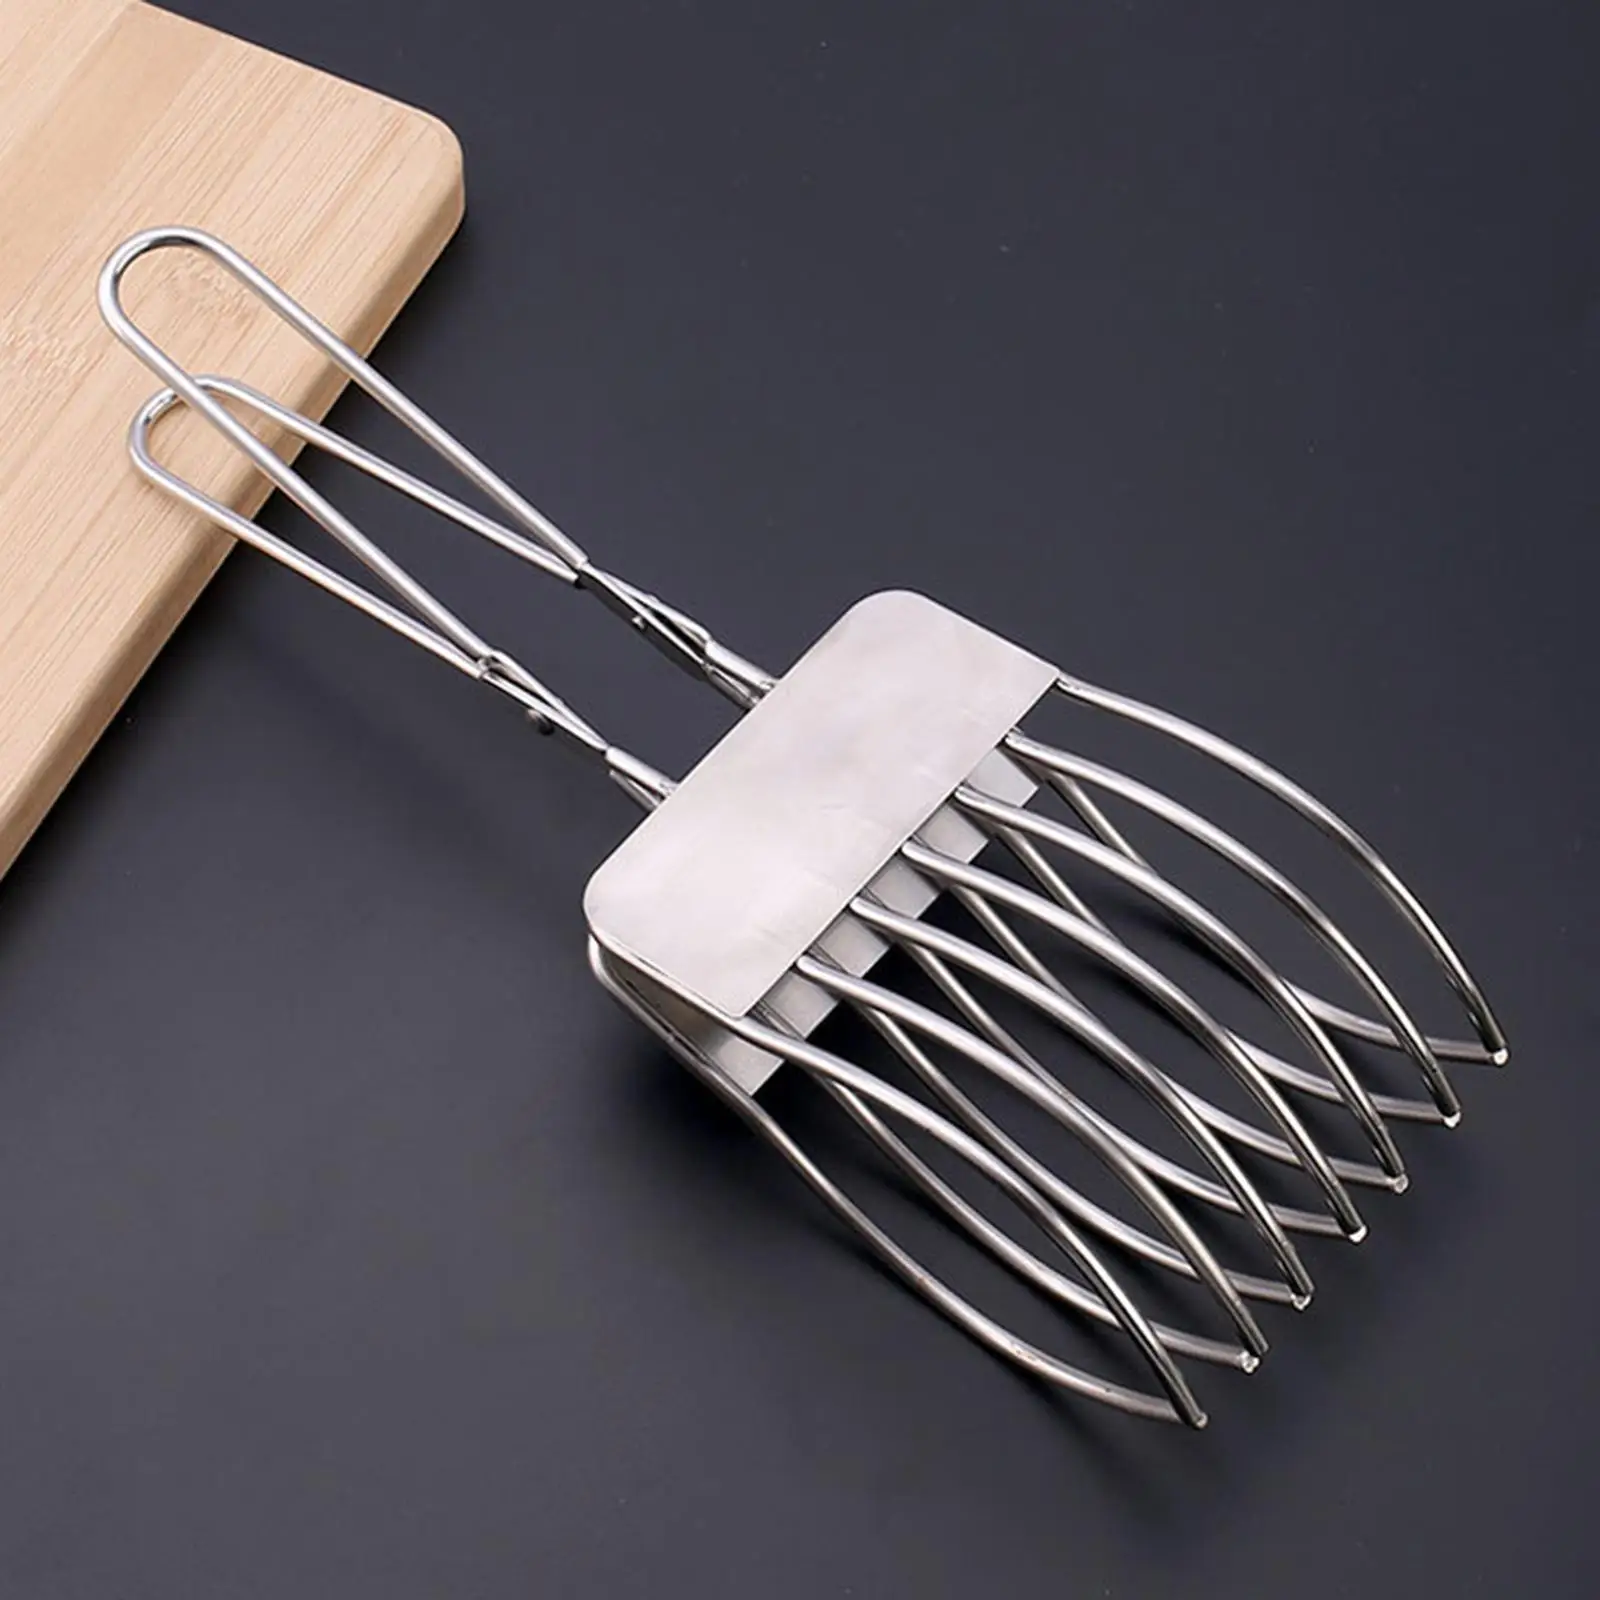 Stainless Steel Roast Beef Tongs Kitchen Tongs Cooking Tools Accessories for Slicing Vegetable